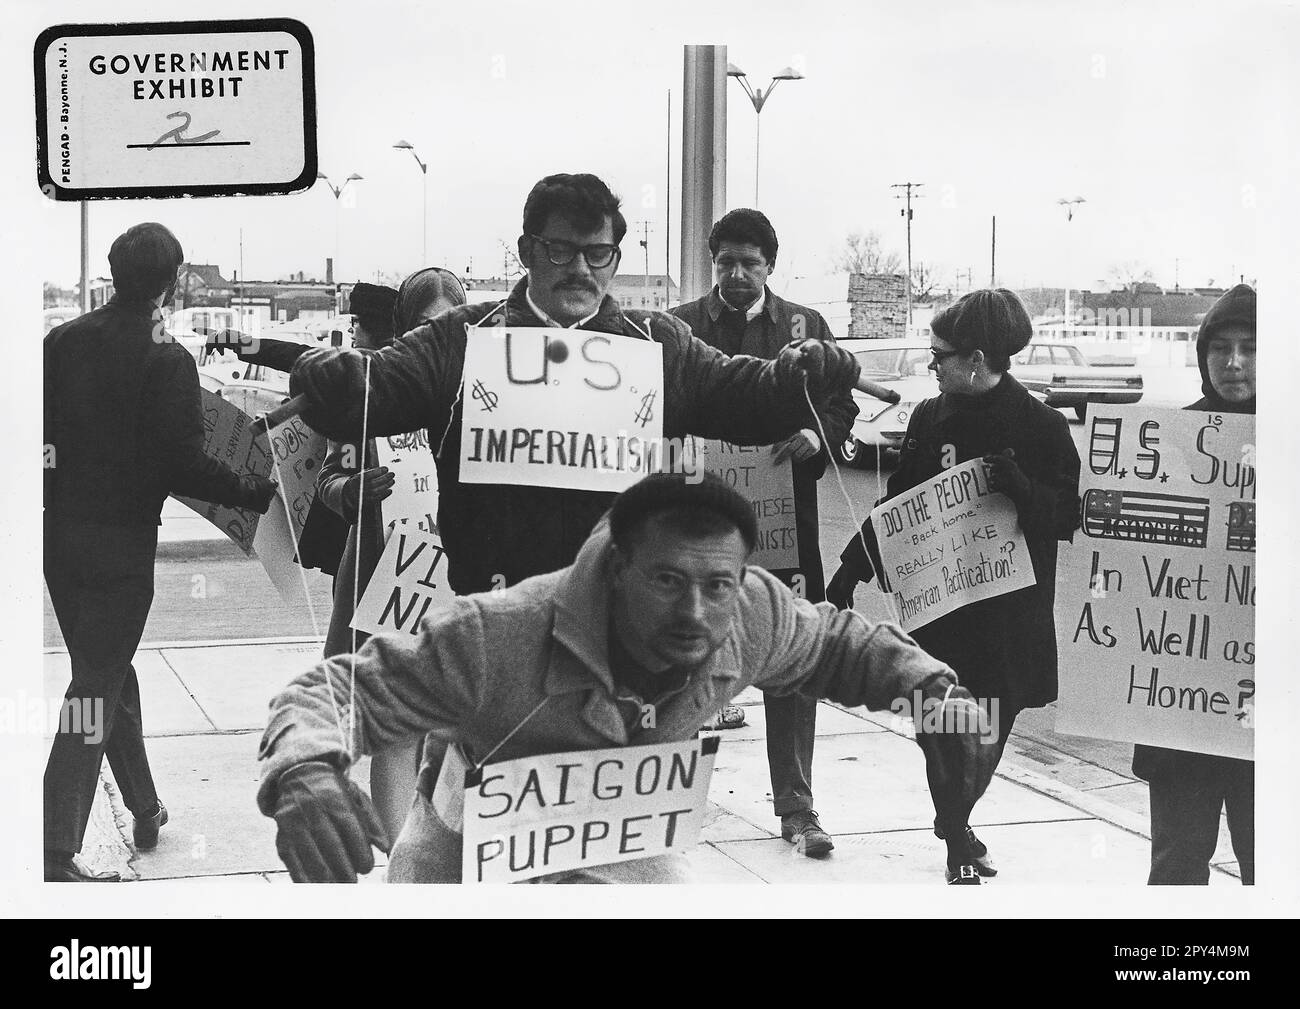 USA: Vietnam War and anti-imperialist protestors in Wichita, Kansas, 1967.  The Second Indochina War, known in America as the Vietnam War, was a Cold War era military conflict that occurred in Vietnam, Laos, and Cambodia from 1 November 1955 to the fall of Saigon on 30 April 1975. This war followed the First Indochina War and was fought between North Vietnam, supported by its communist allies, and the government of South Vietnam, supported by the U.S. and other anti-communist nations. The U.S. government viewed involvement in the war as a way to prevent a communist takeover of South Vietnam. Stock Photo